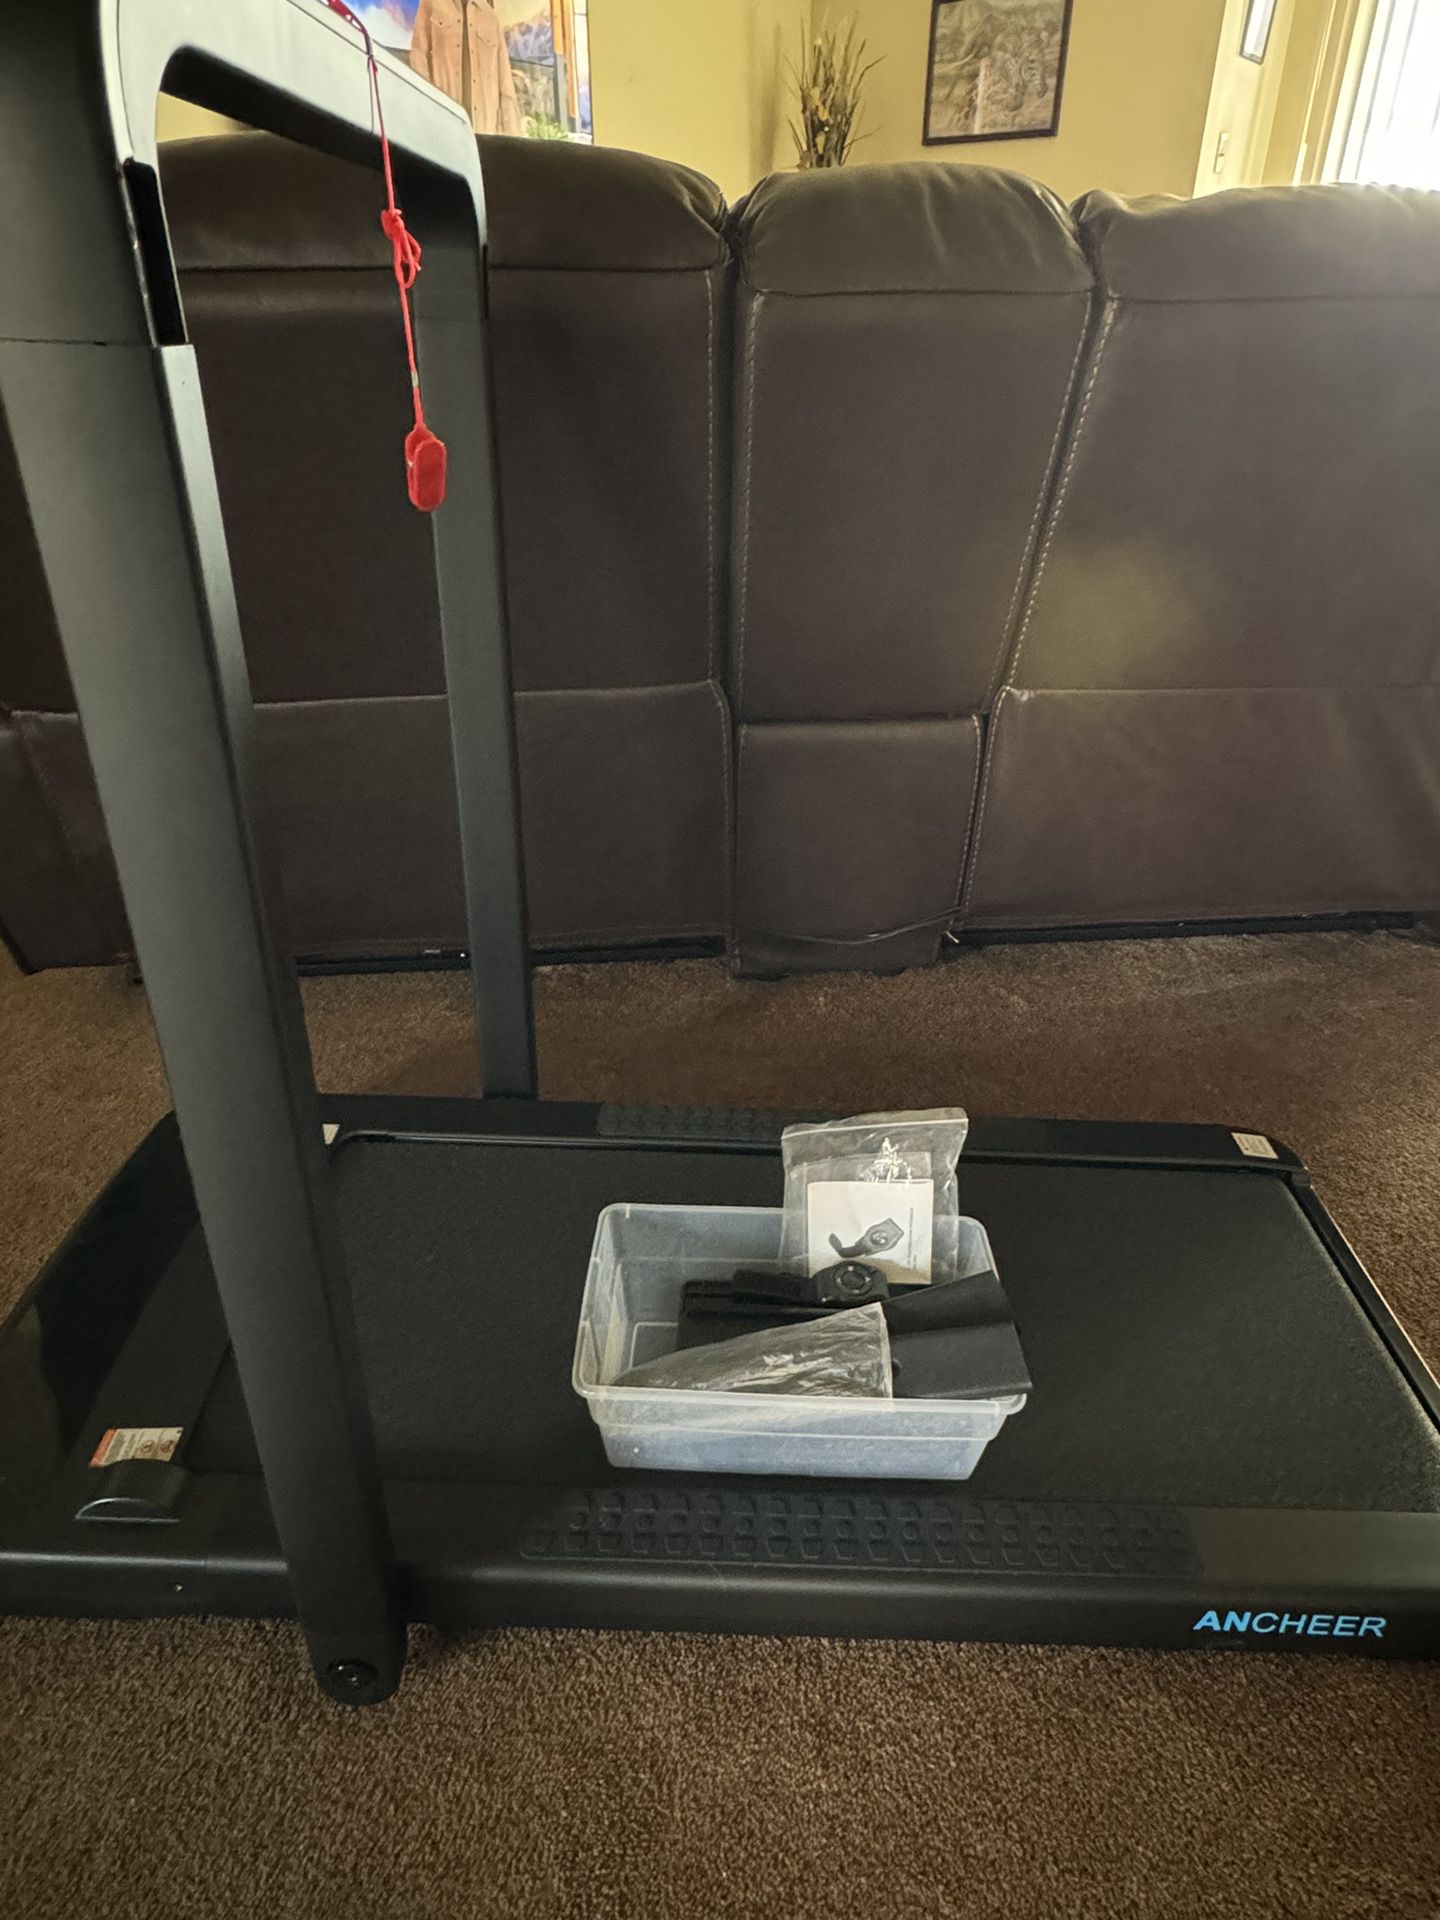 Ancheer Treadmill with watch 